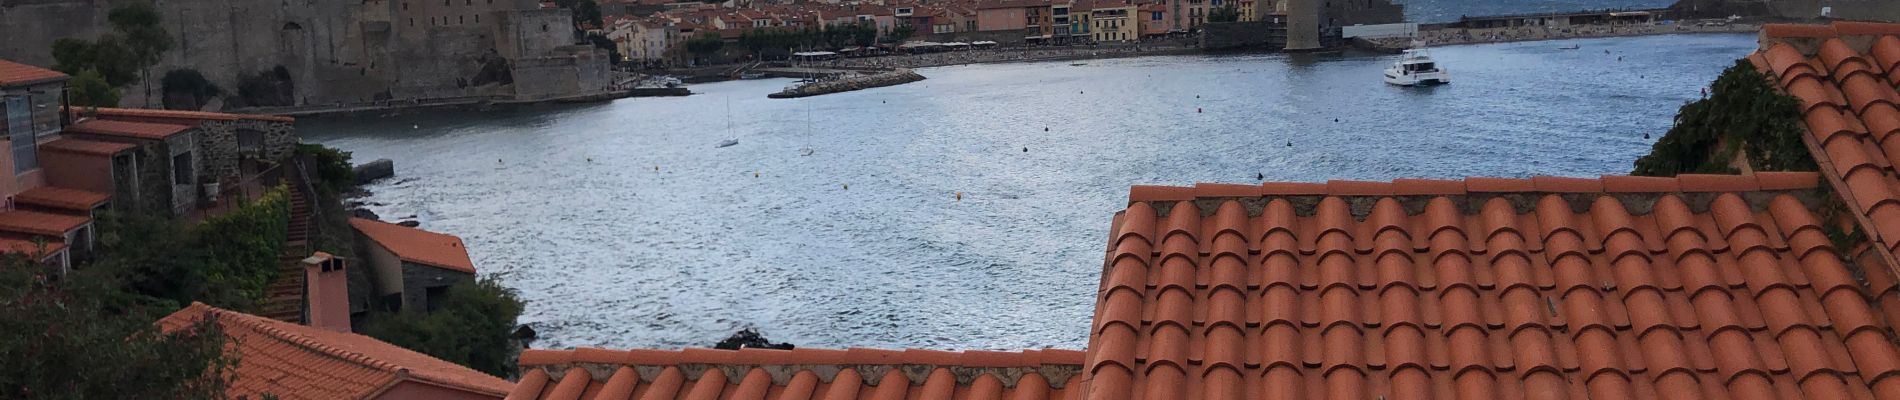 Tocht Stappen Banyuls-sur-Mer - Banyuls port a Collioure - Photo